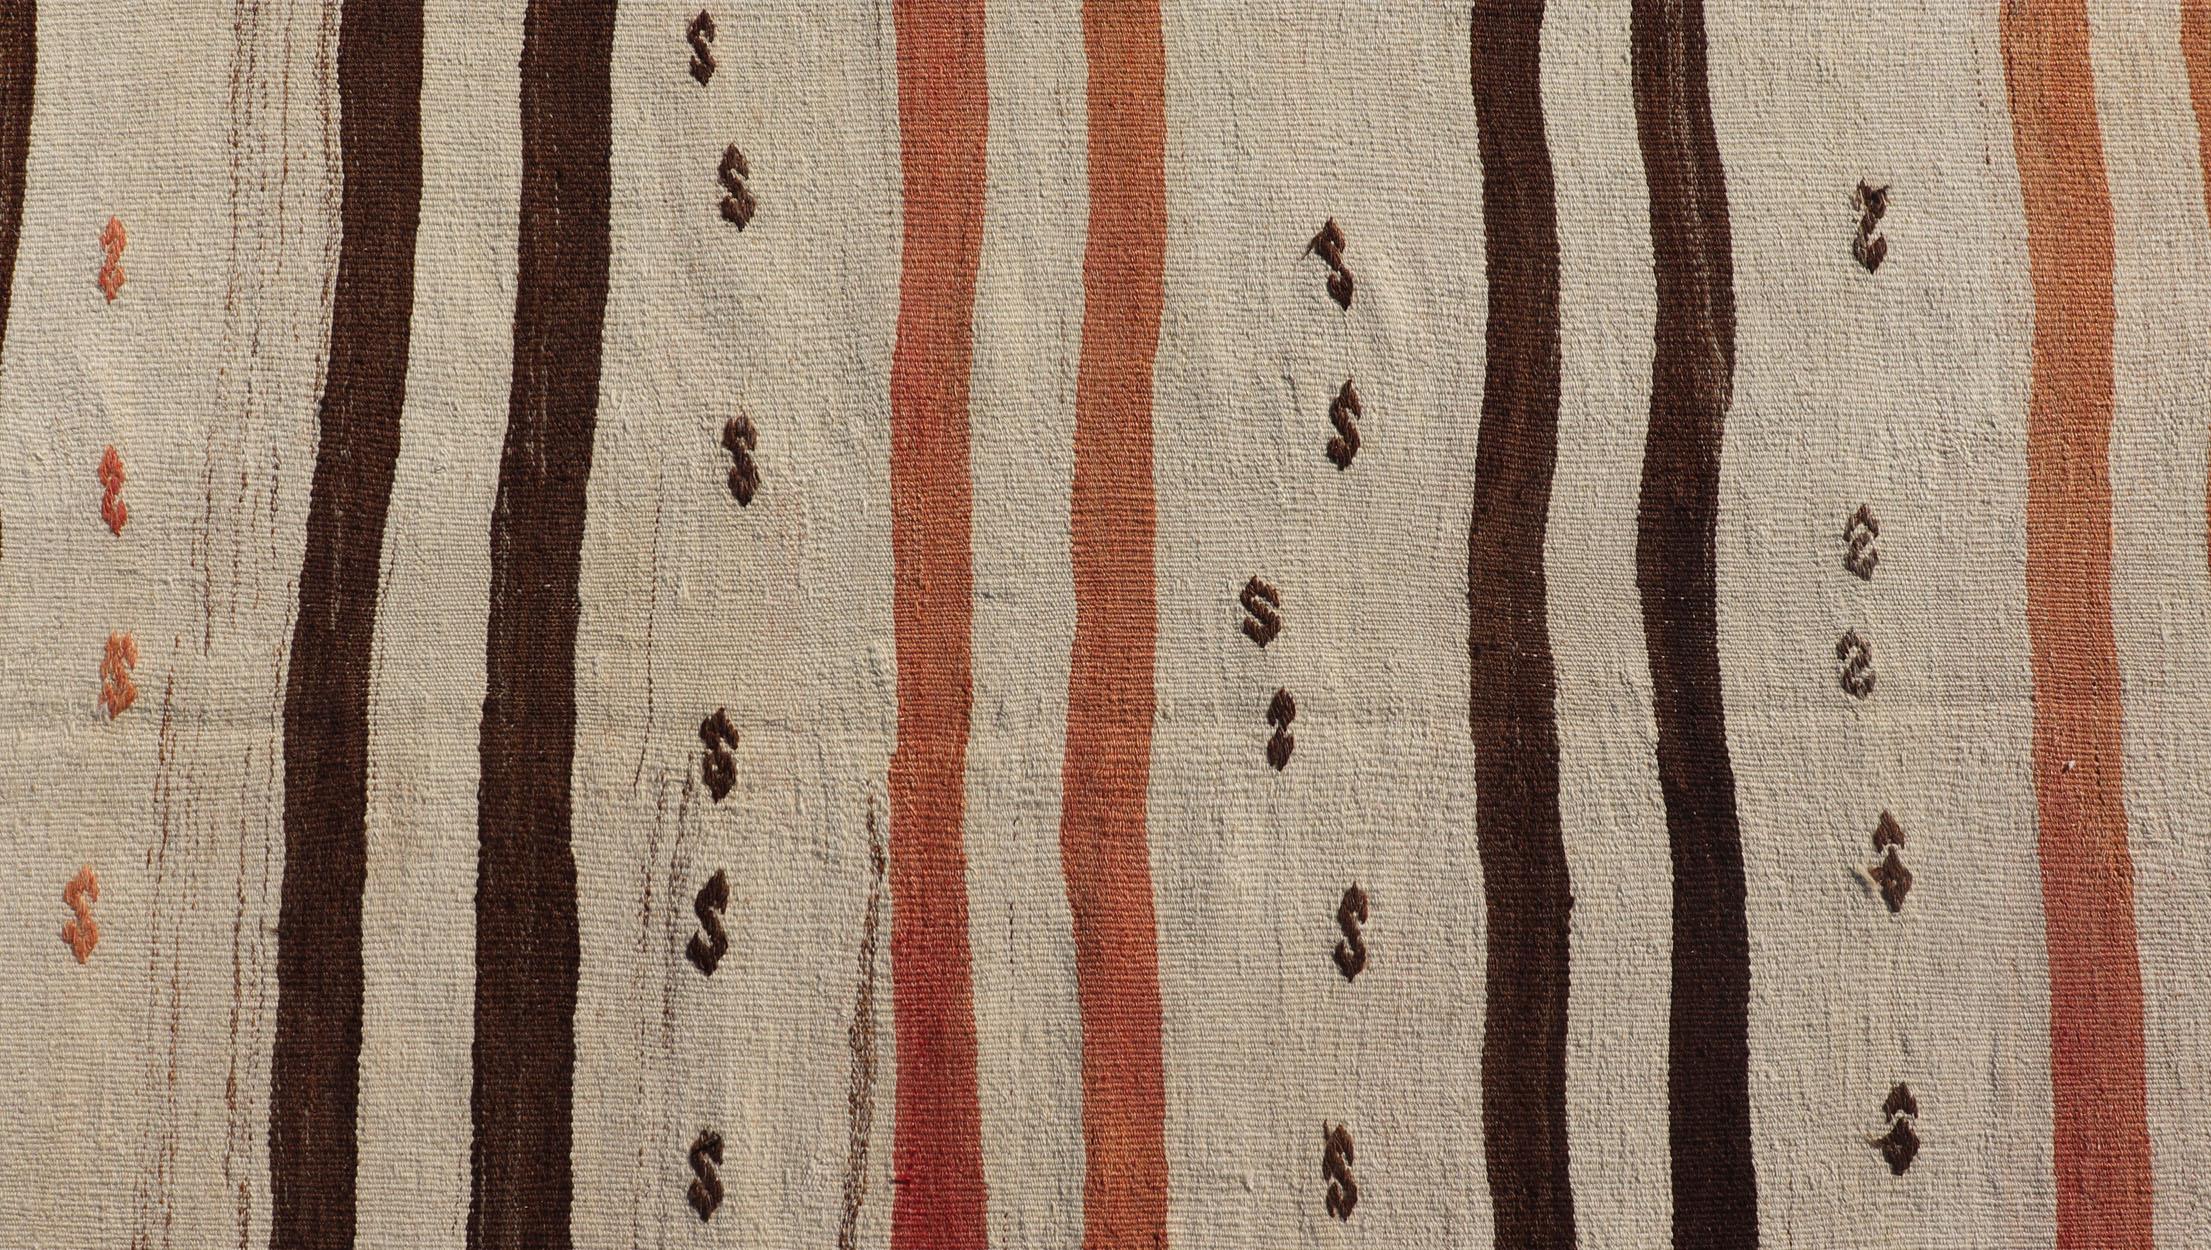 Vintage Turkish Kilim Runner with Stripes in Cream, Brown & Soft Coral Color For Sale 2